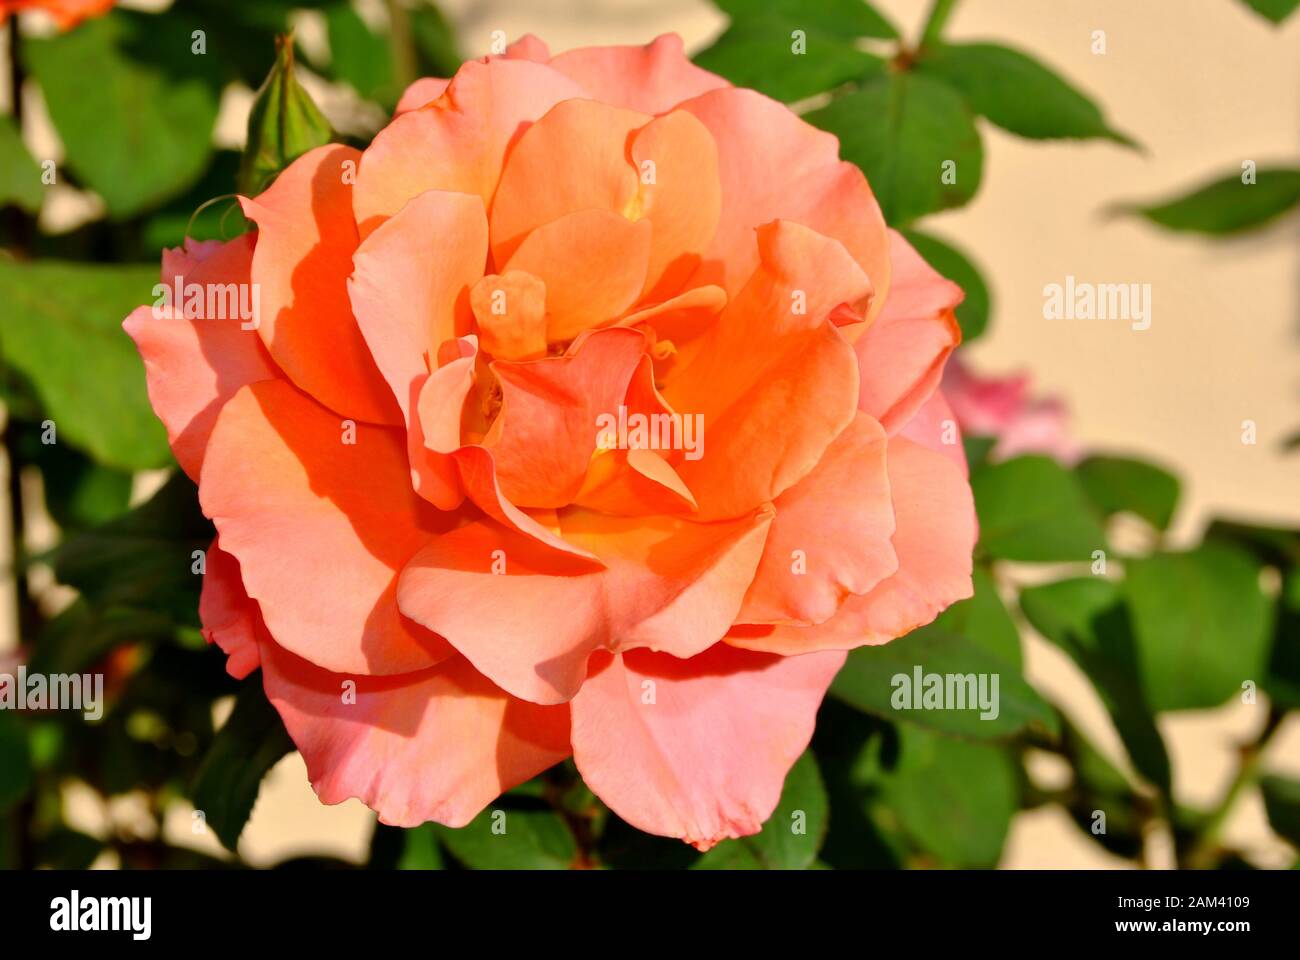 A close up view of a rose Tuscan Sun flower Stock Photo